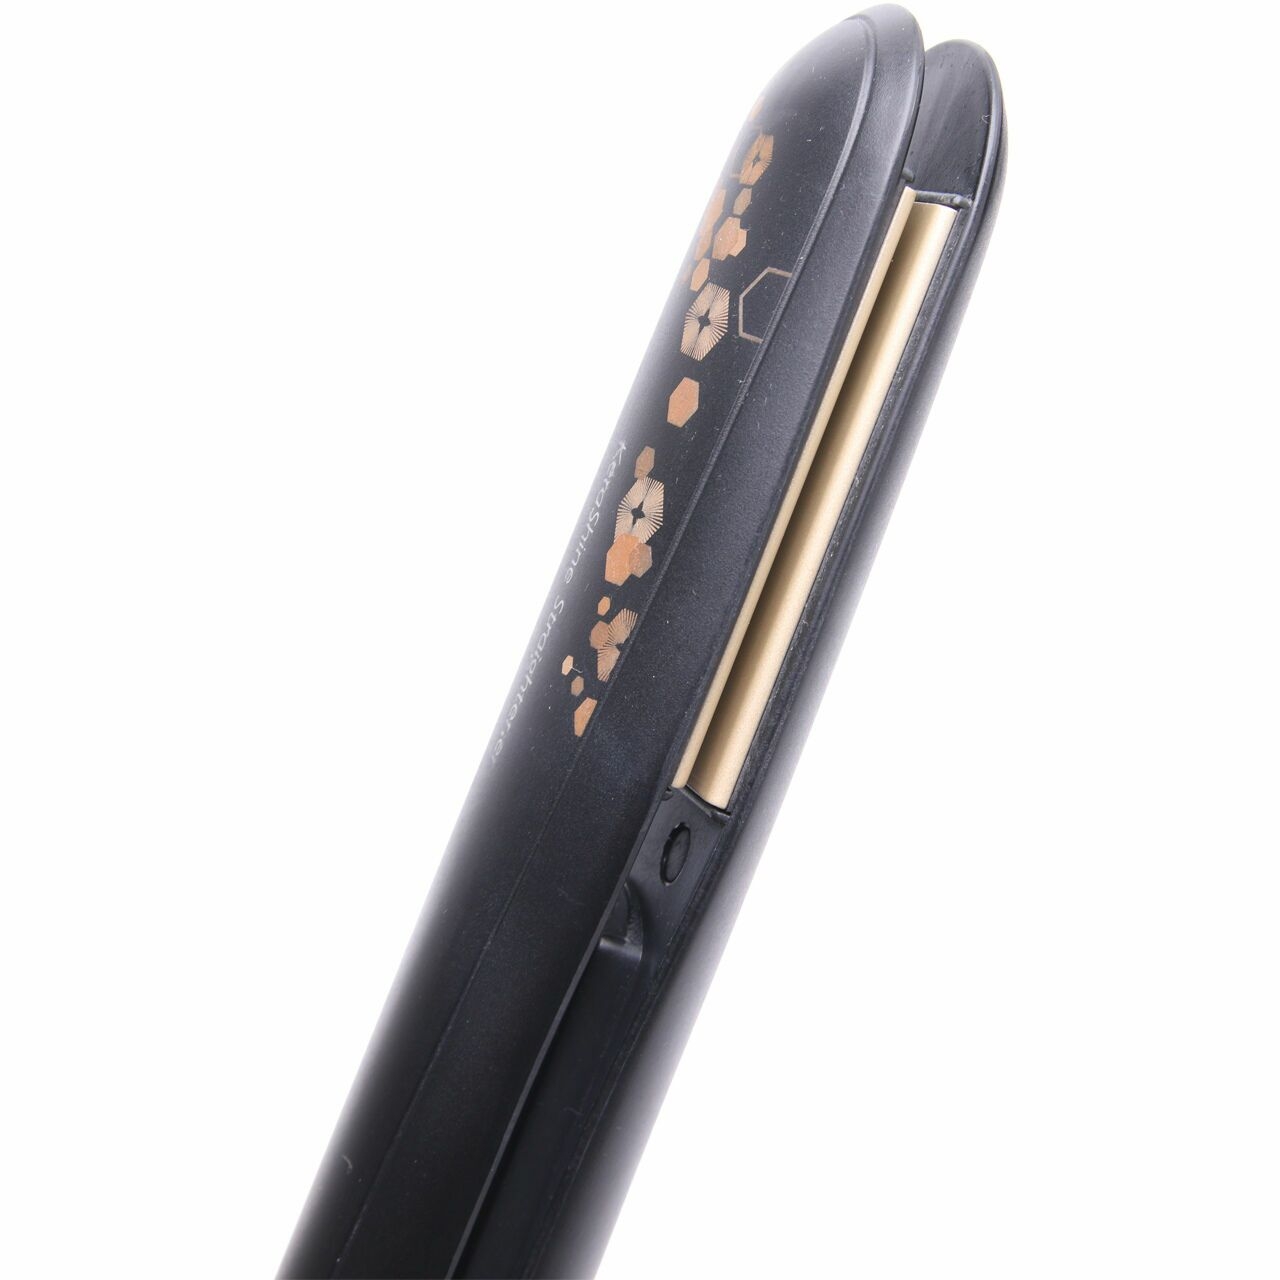 Philips Shine Therapy For Silky Smooth Hair Black Tools